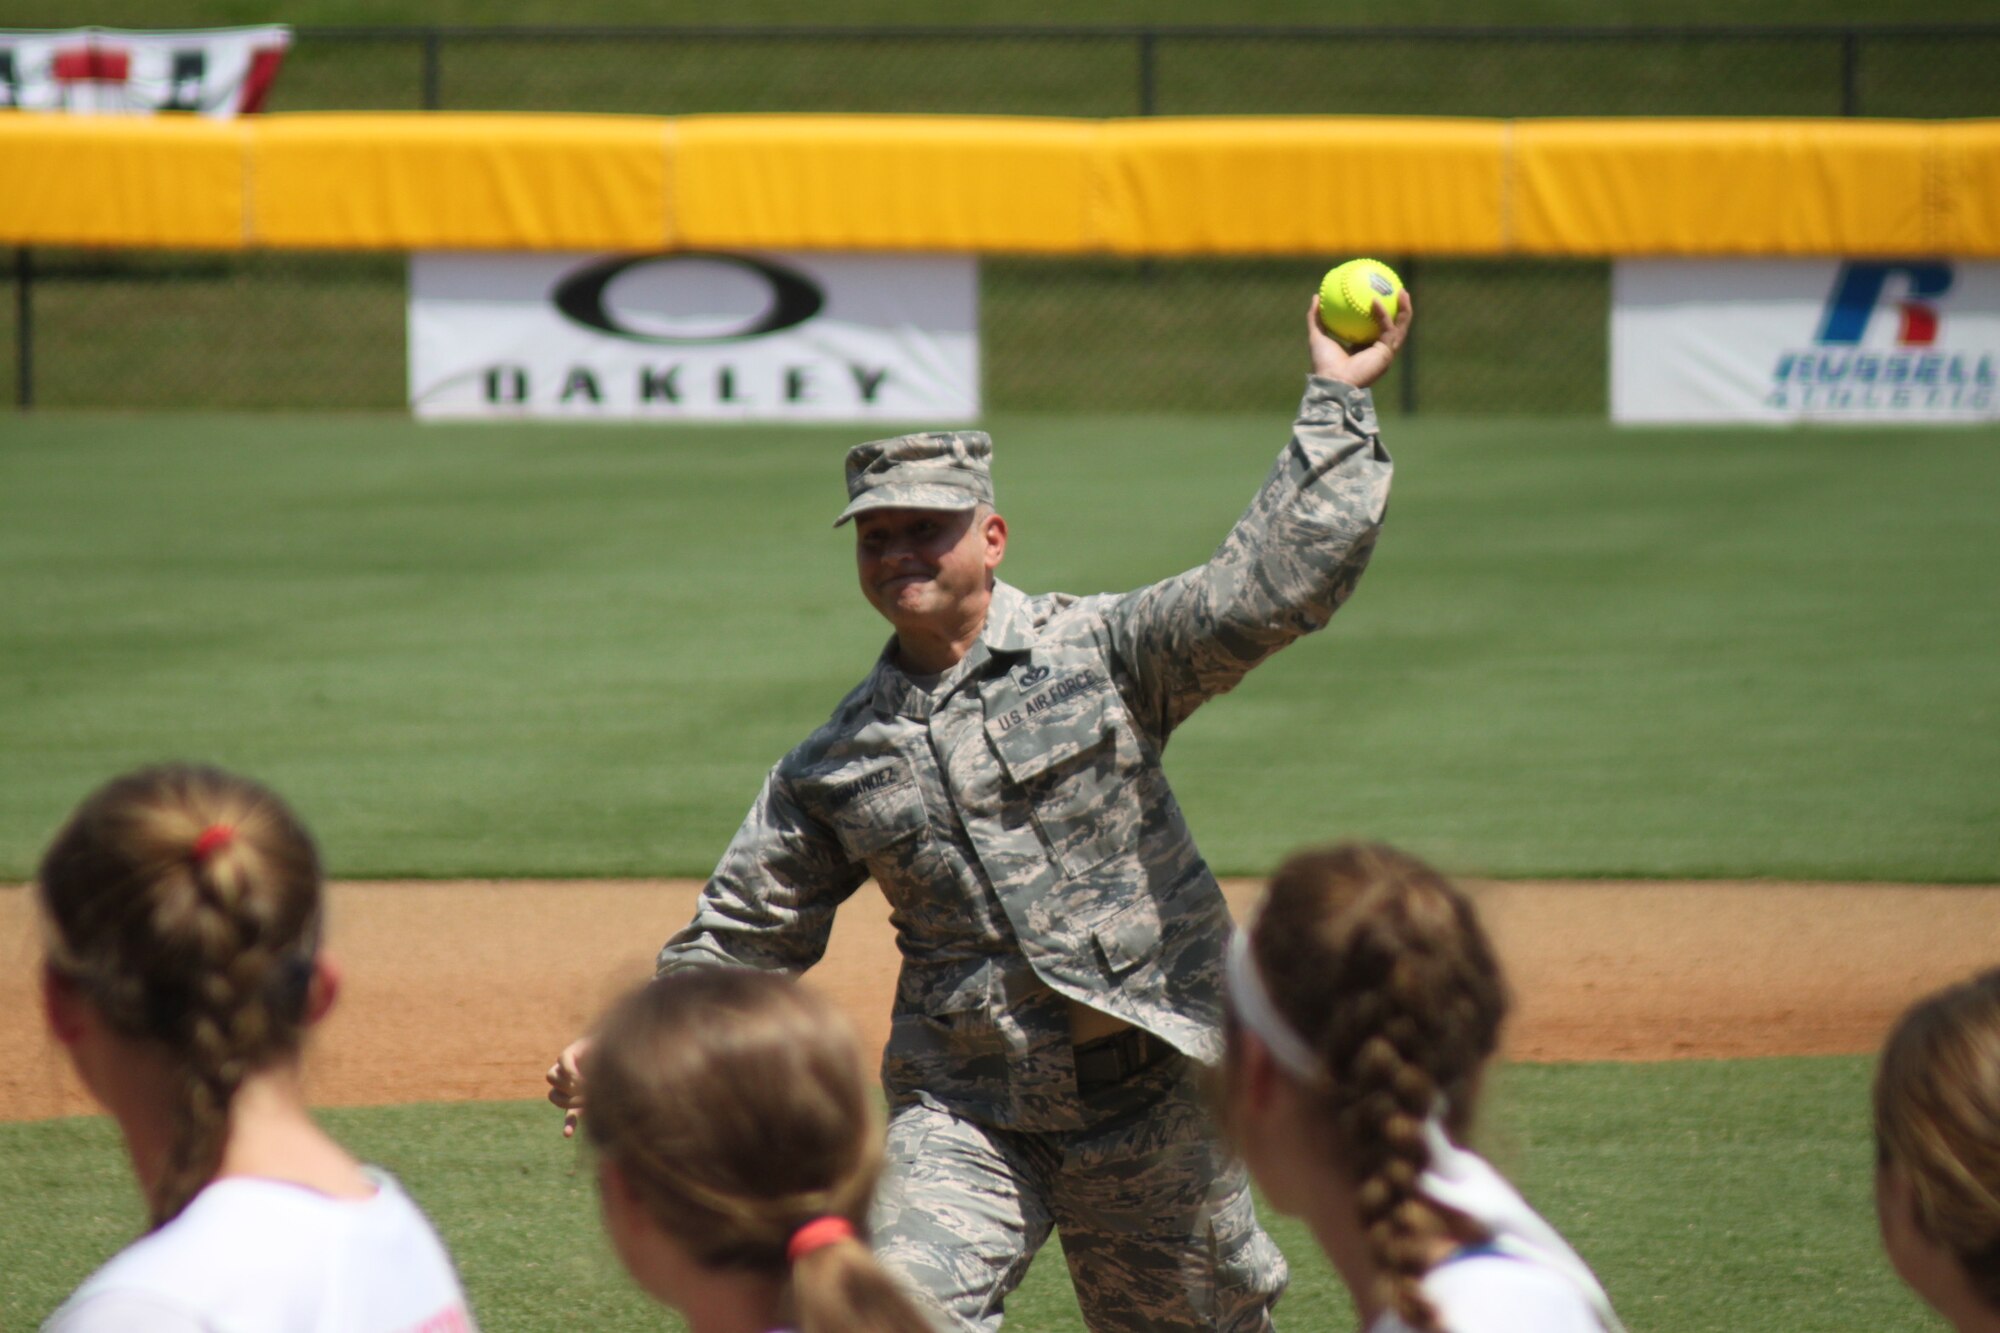 Base Wing command chief, showed off his skills on the mound Sunday, as he delivered the ceremonial first pitch at the North Carolina vs. Tennessee Little League Southeastern
Region Softball Tournament game.

North Carolina won the game 9-2 and went on to win the championship game against Virginia to advance to the Little League Softball World Series.

The Little League Southeastern Region Baseball Tournament begins today. For more information, visit
http://www.eteamz.com/llbsouth/news/index.cfm?cat=894070.